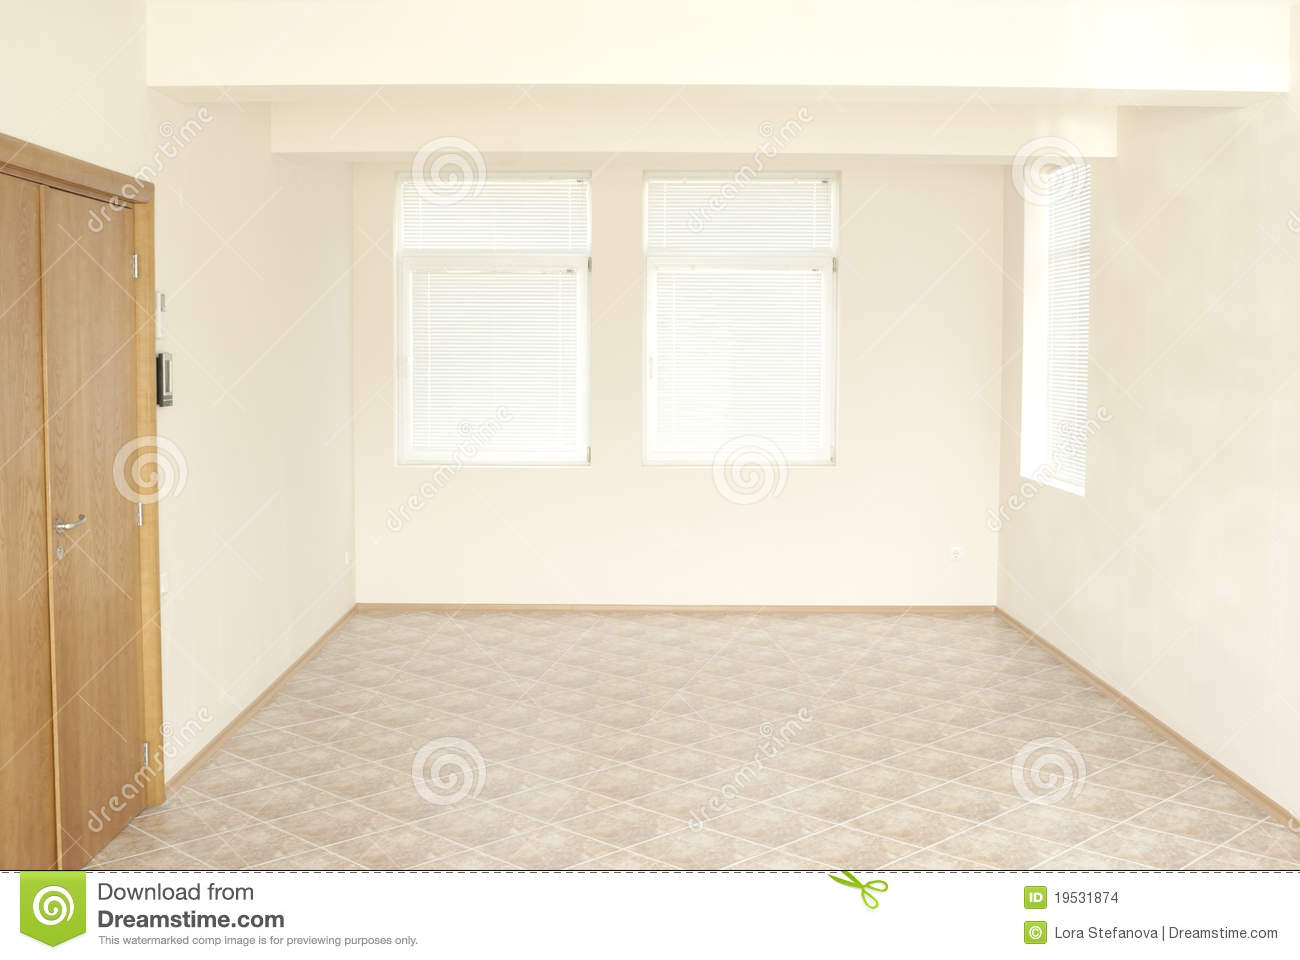 Empty Office Room With Wooden Door That Can Be Used For Background Or